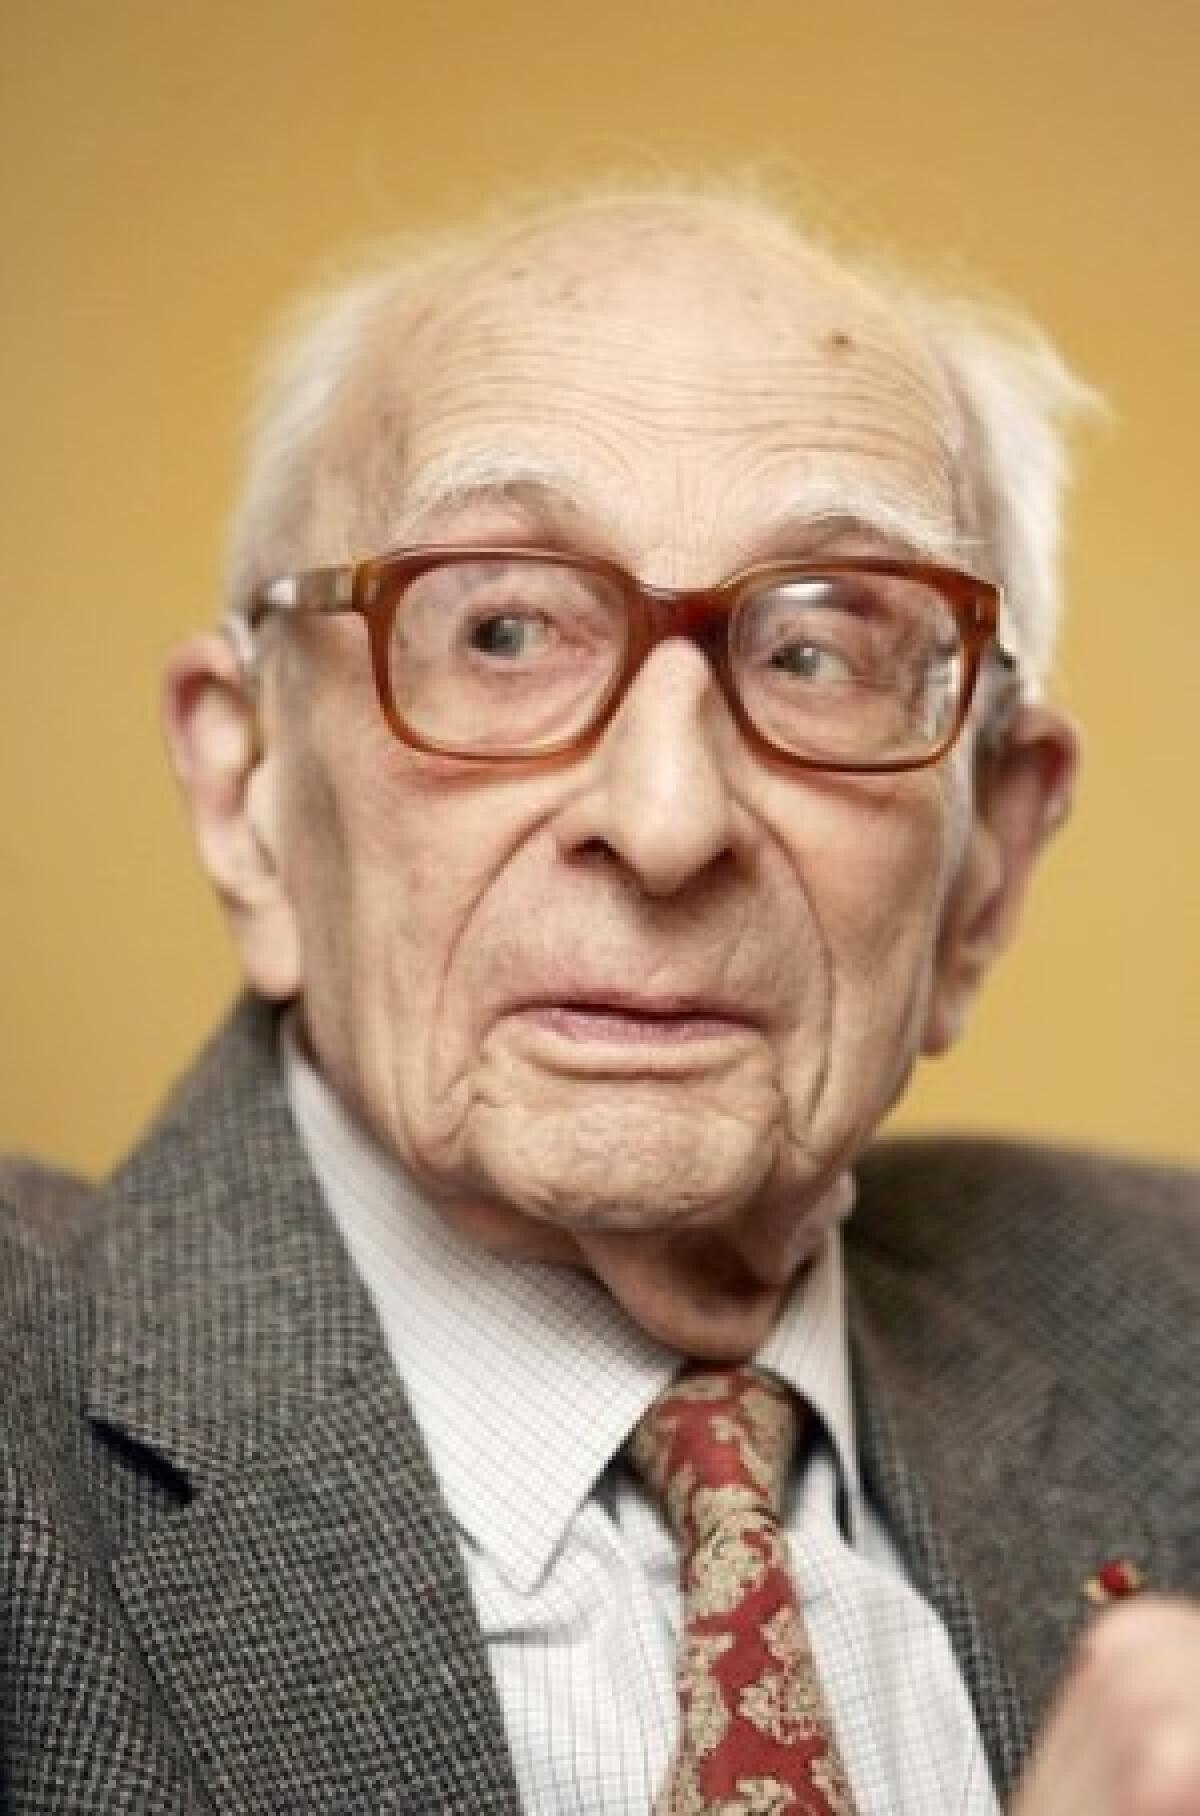 Claude Levi-Strauss  Biography, Structuralism, Books, & Facts